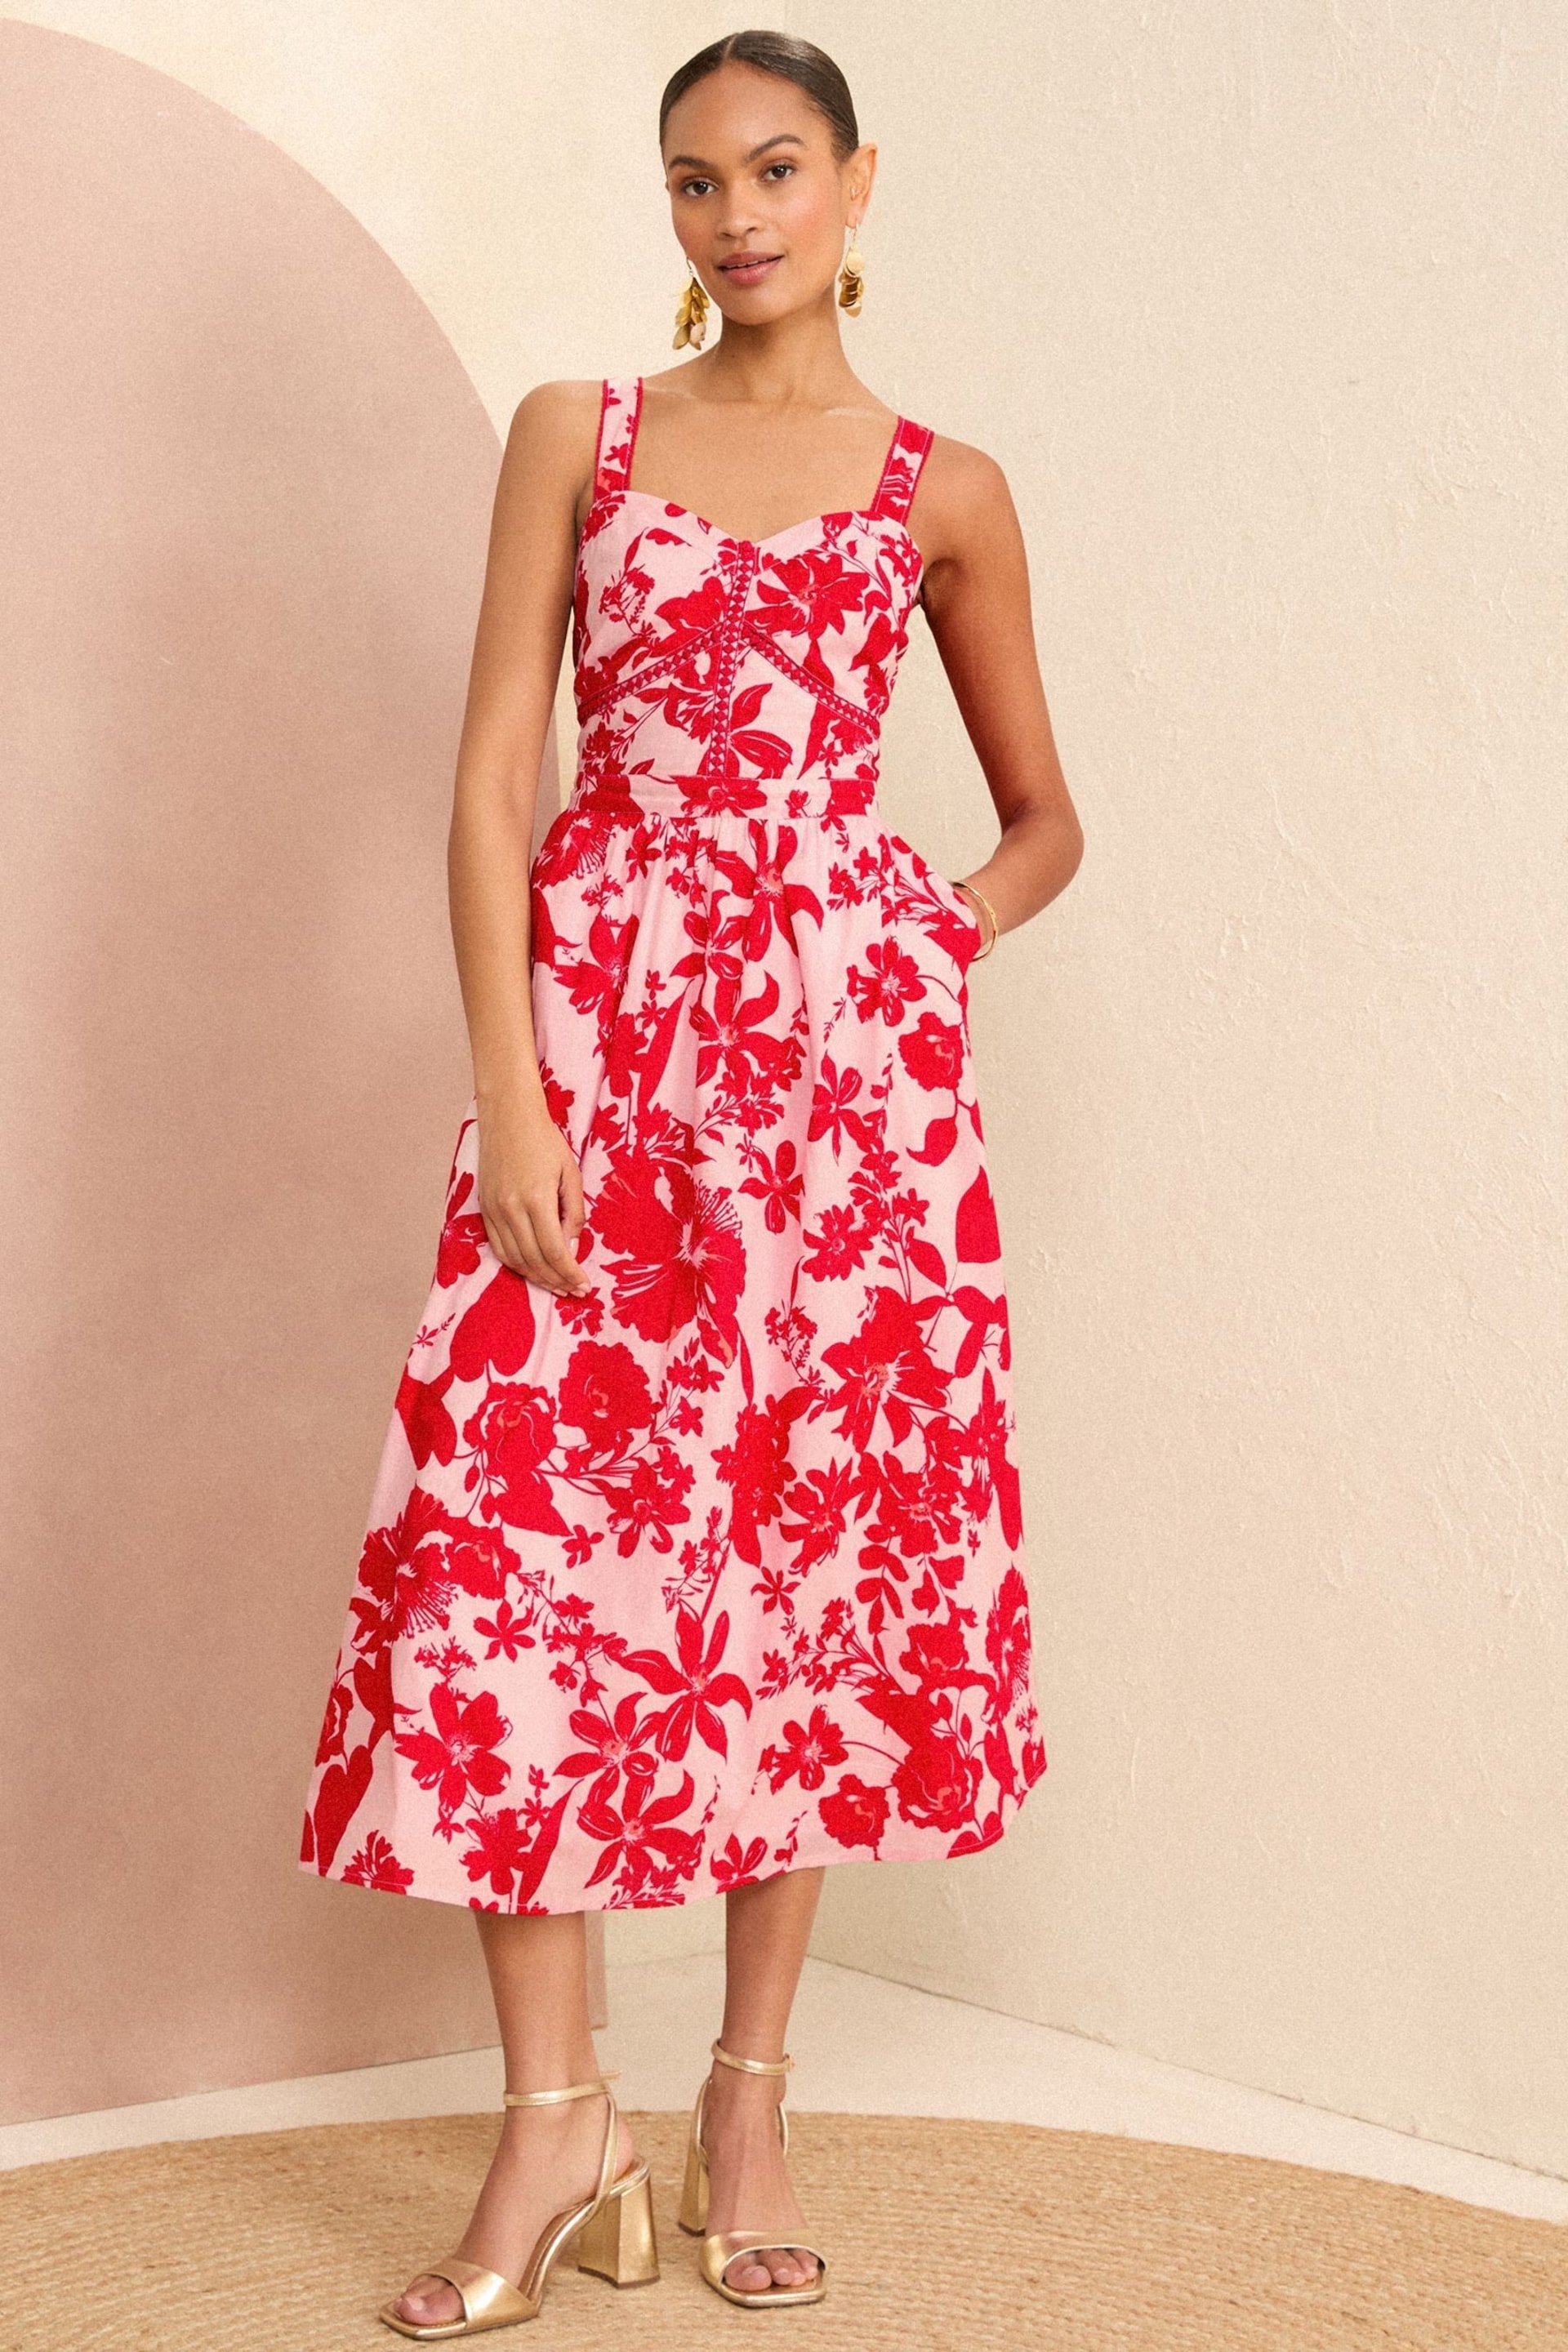 Love & Roses Pink and Red Floral Cami Corset Lace Trim Cotton Midi Dress - Image 1 of 4